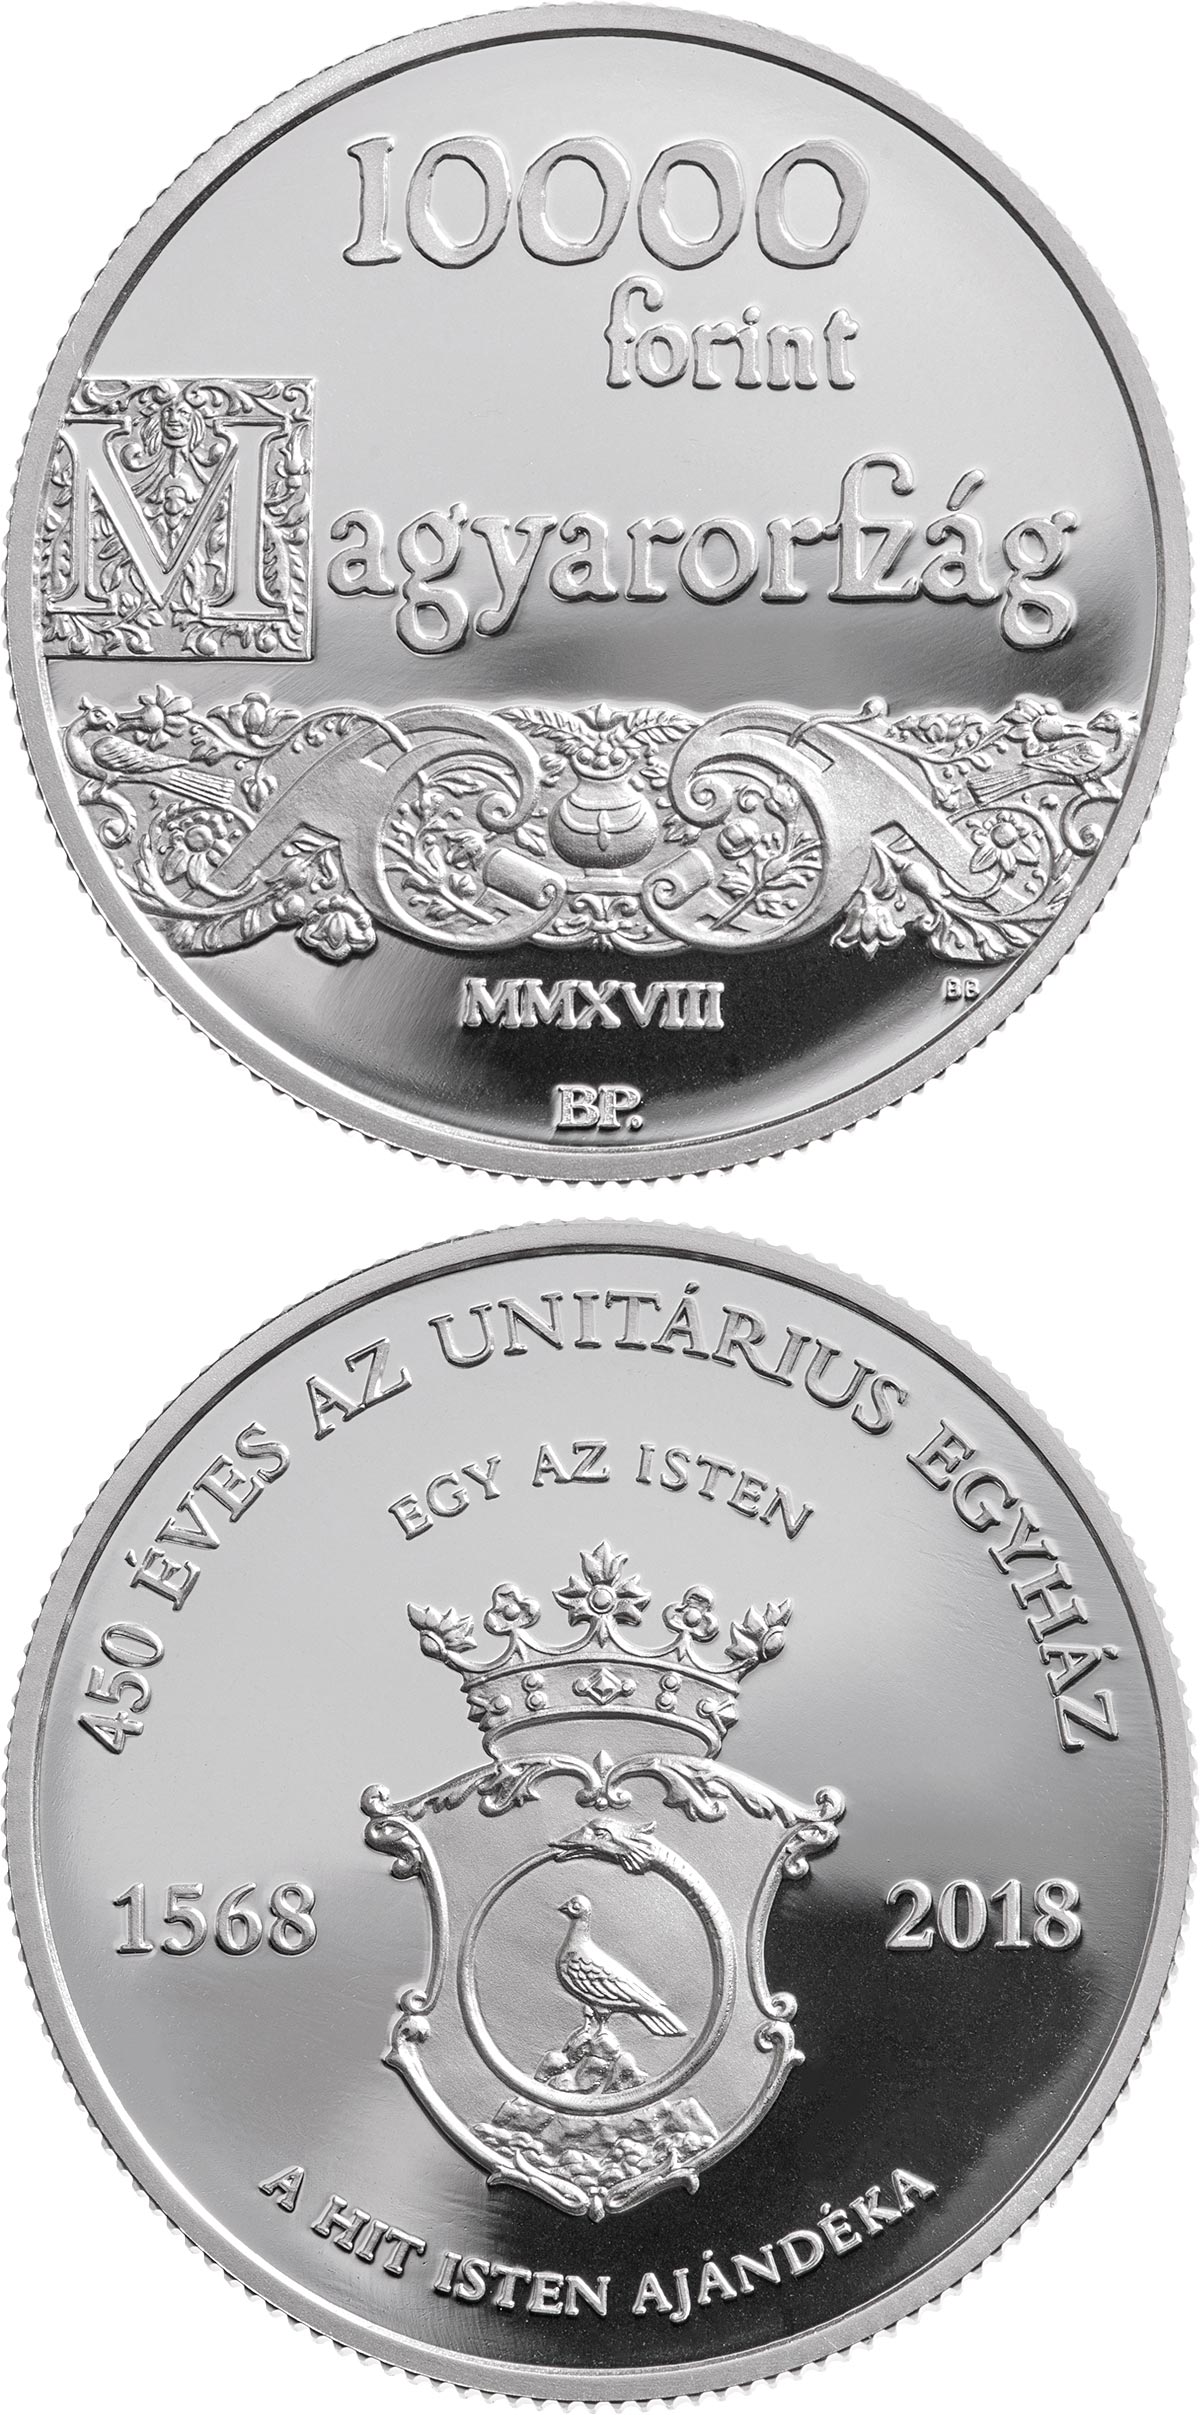 Image of 10000 forint coin - 450th Anniversary of the Unitarian Church | Hungary 2018.  The Silver coin is of Proof quality.